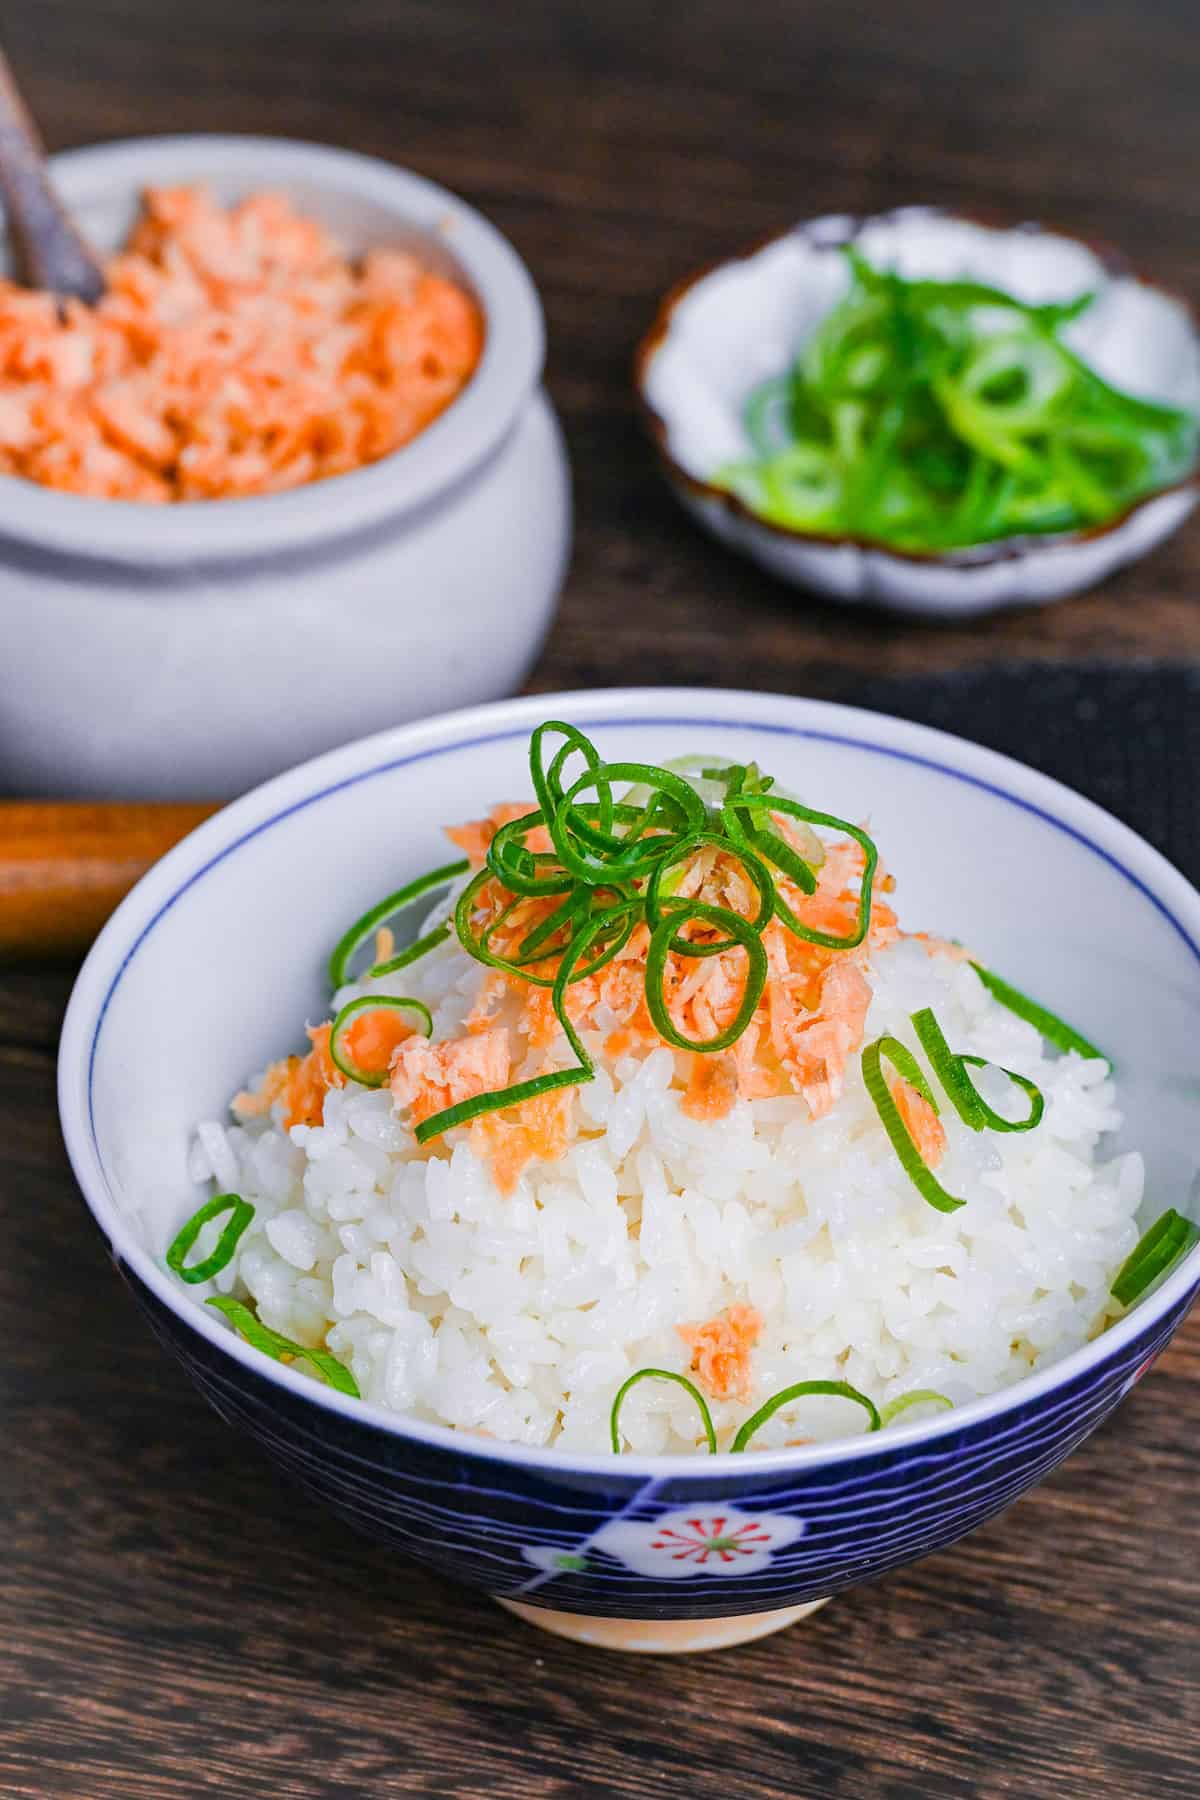 Homemade Japanese-style salmon flakes on rice topped with chopped green onion